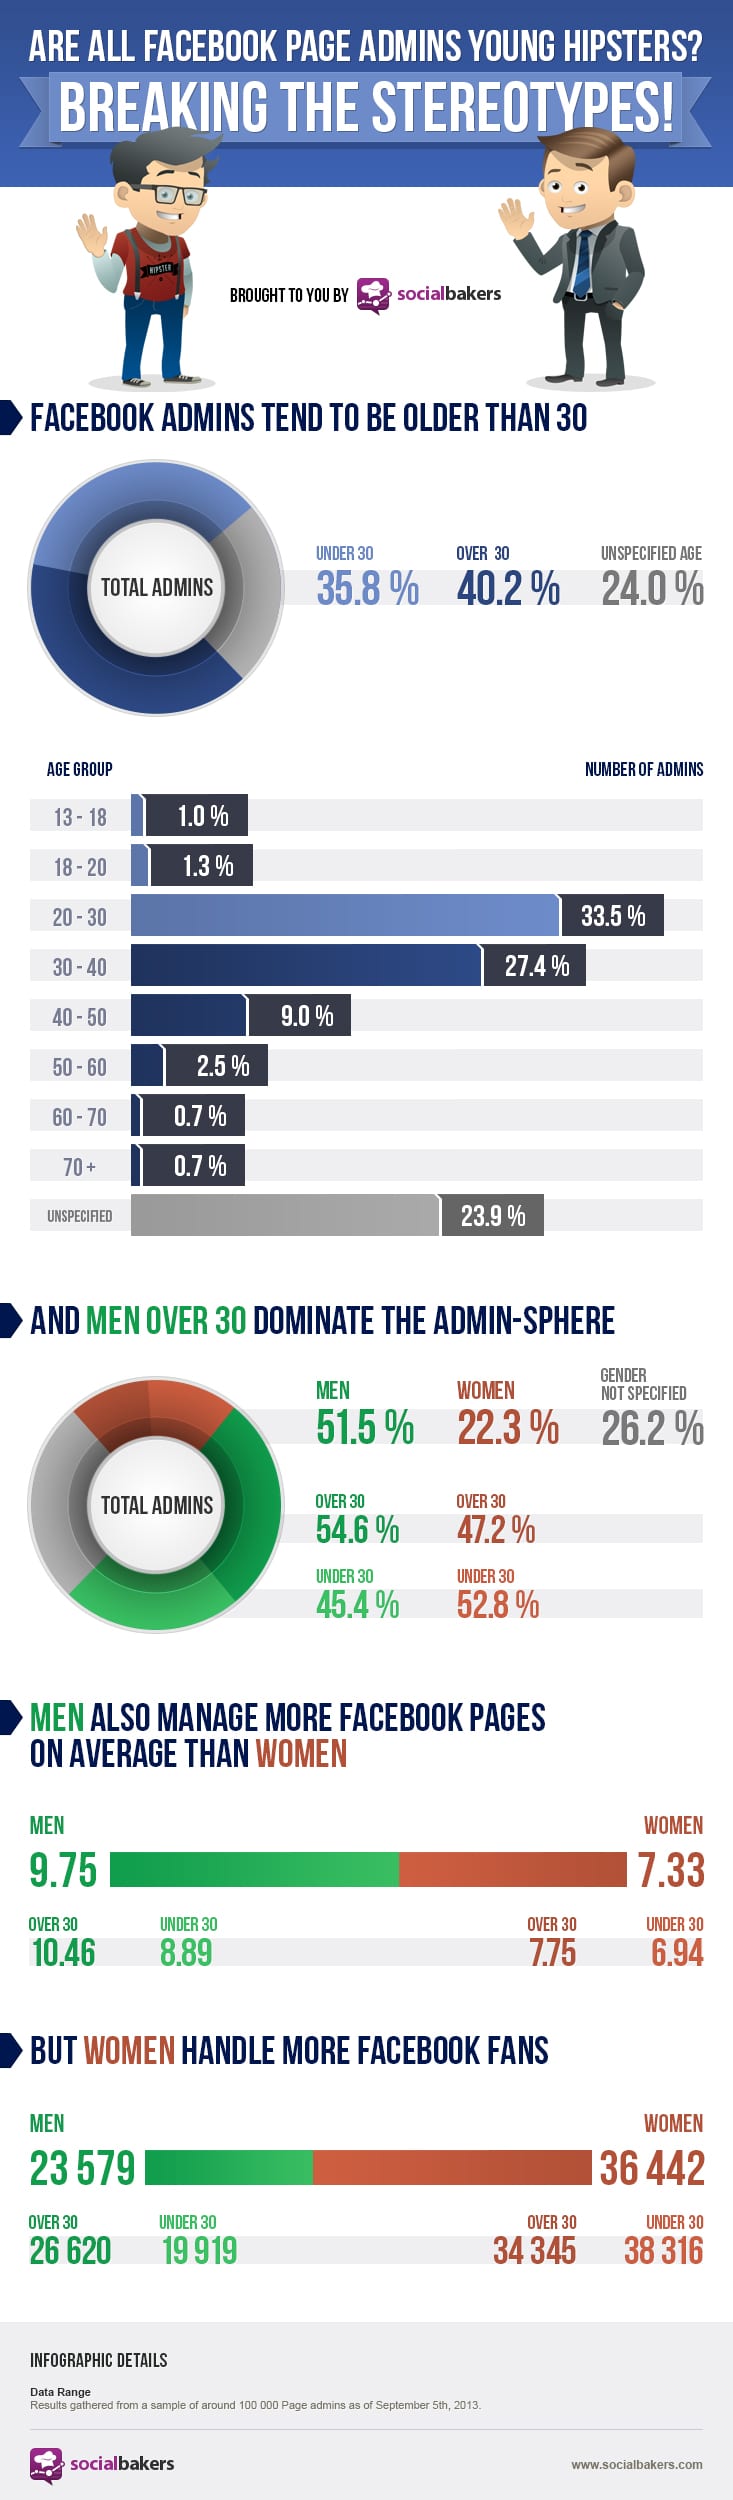 Surprise: Average Facebook Admin Is Older Than You Think [Infographic]